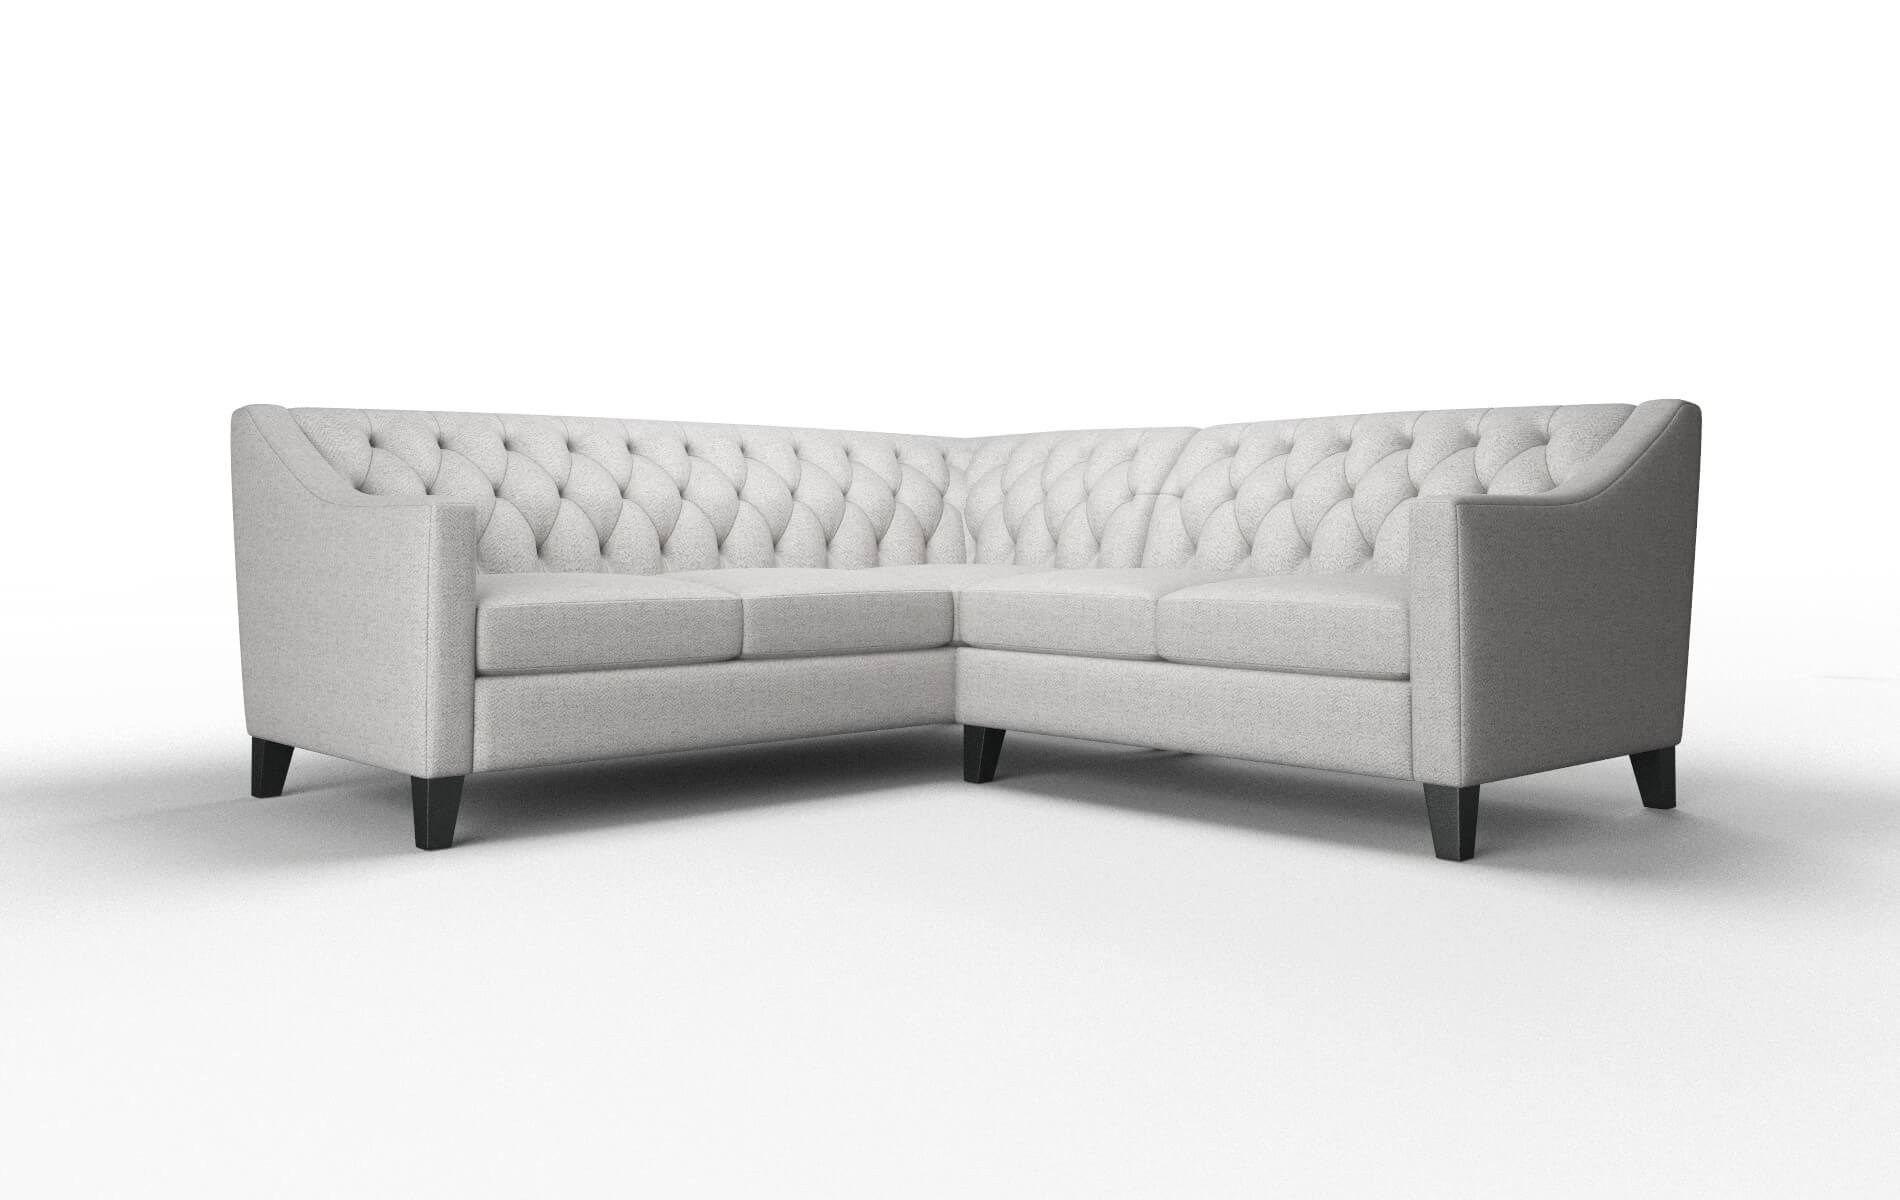 Seville Catalina Silver Sectional espresso legs